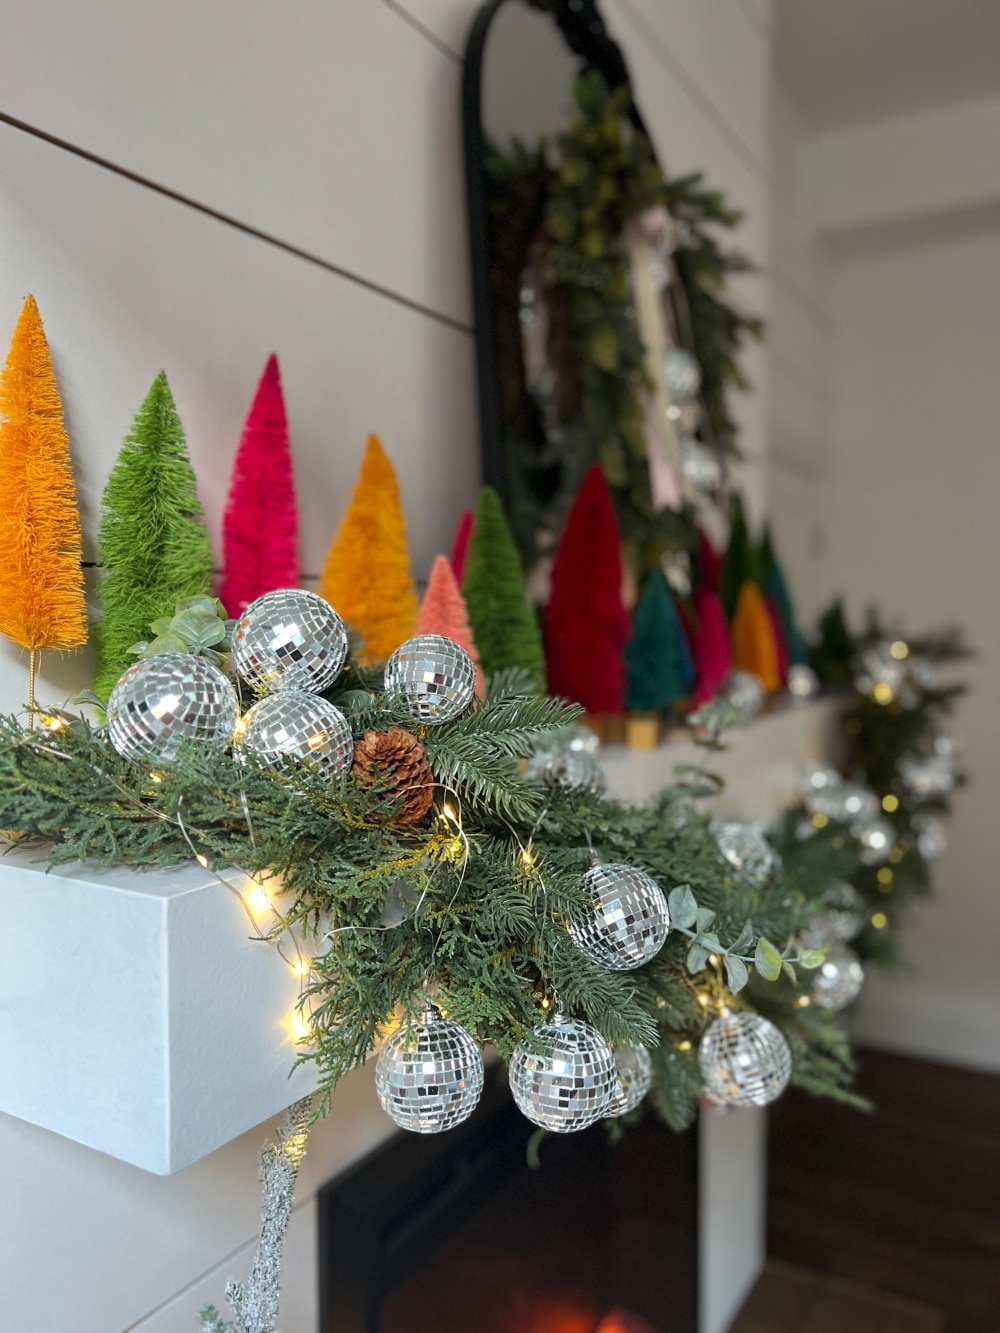 For those who love a bit of sparkle and glamour, the disco ball ornament garland is a must-try. Repurpose some disco balls into a dazzling garland that will turn your Christmas tree into the ultimate showstopper.